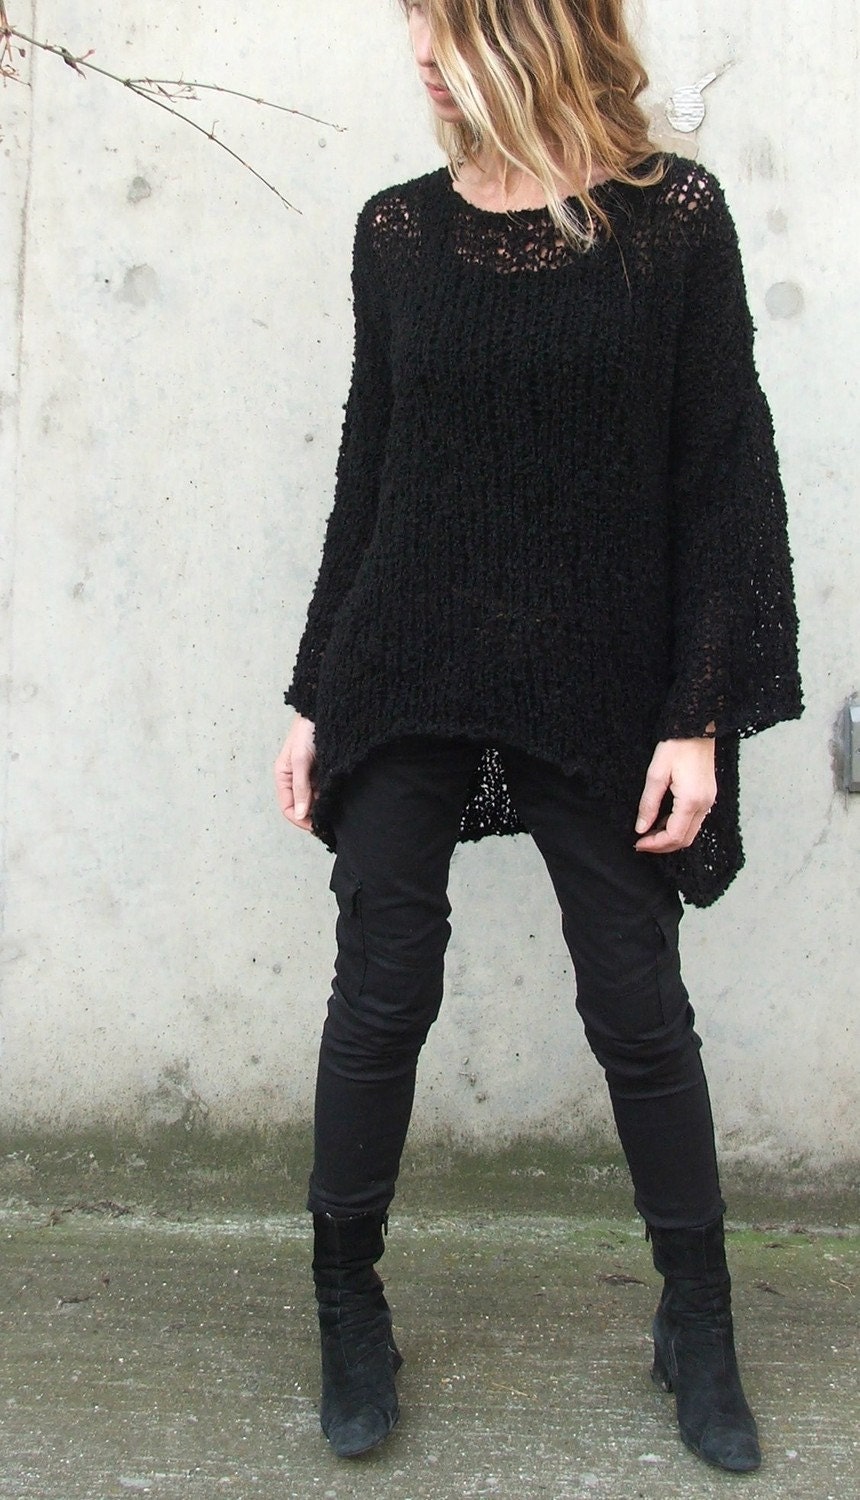 The iLE AiYE warm comfy sweater in Black